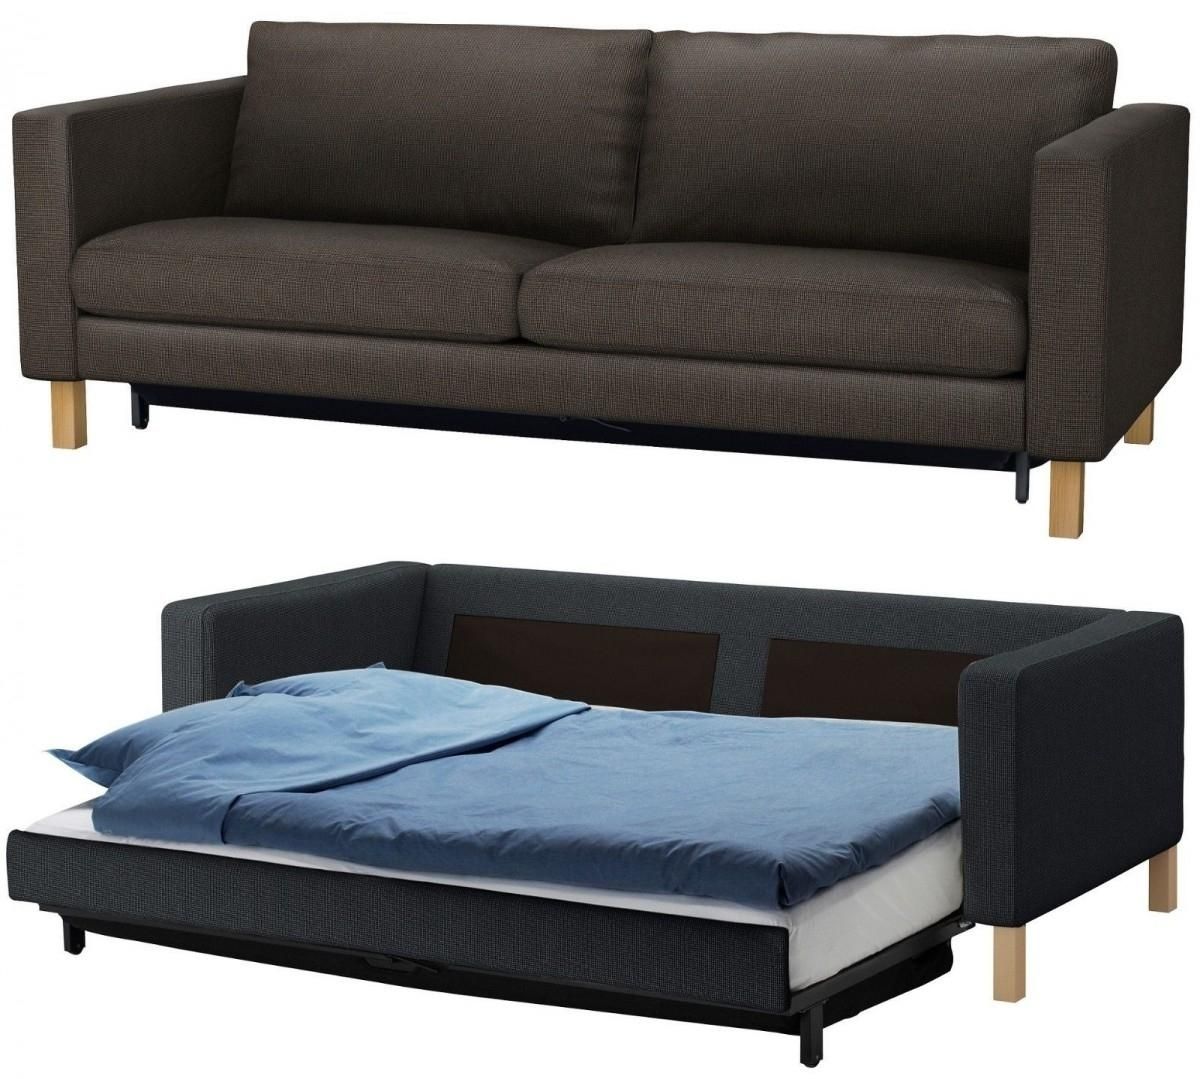 Sofas: Sleeper Sofas Ikea That Great For A Quick Snooze Or Night Throughout Ikea Sectional Sleeper Sofa (View 12 of 20)